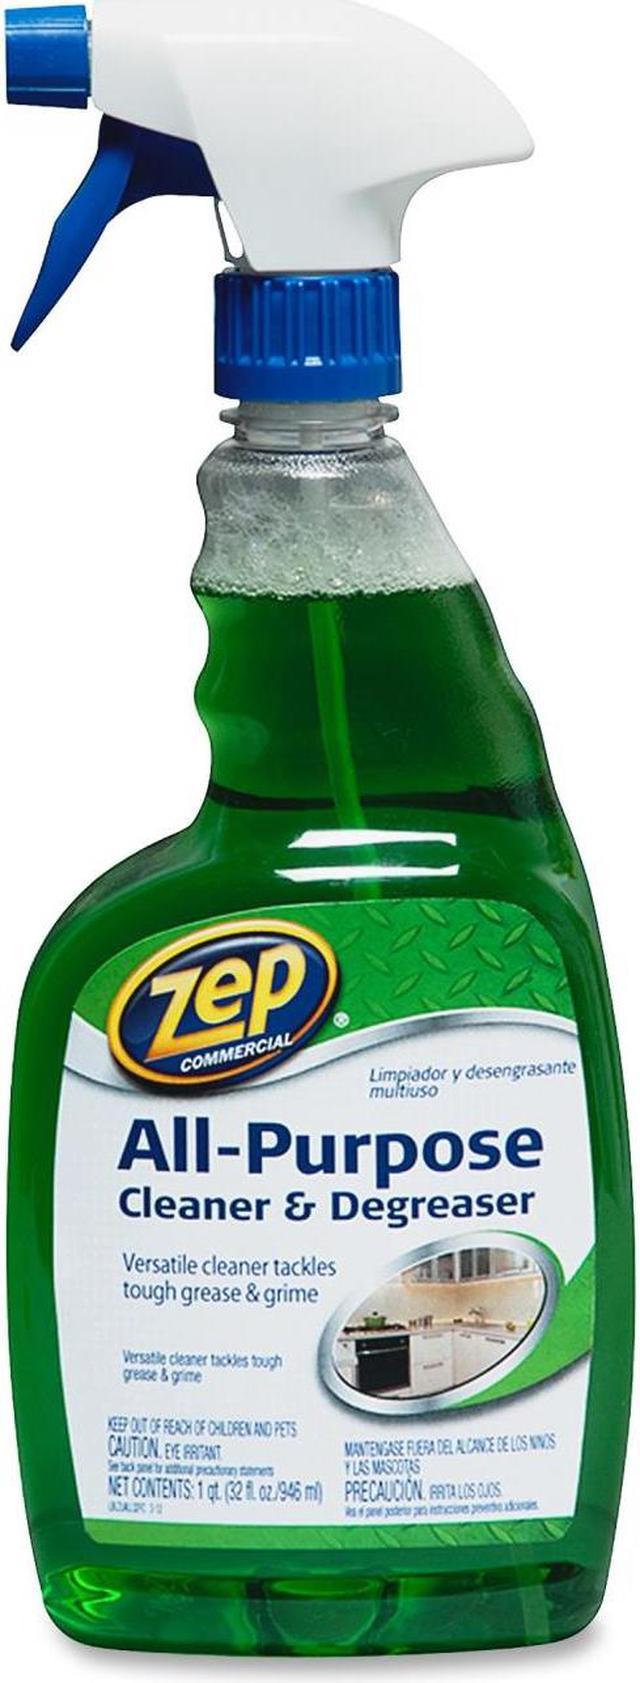 Zep 32 oz All Purpose Cleaner and Degreaser